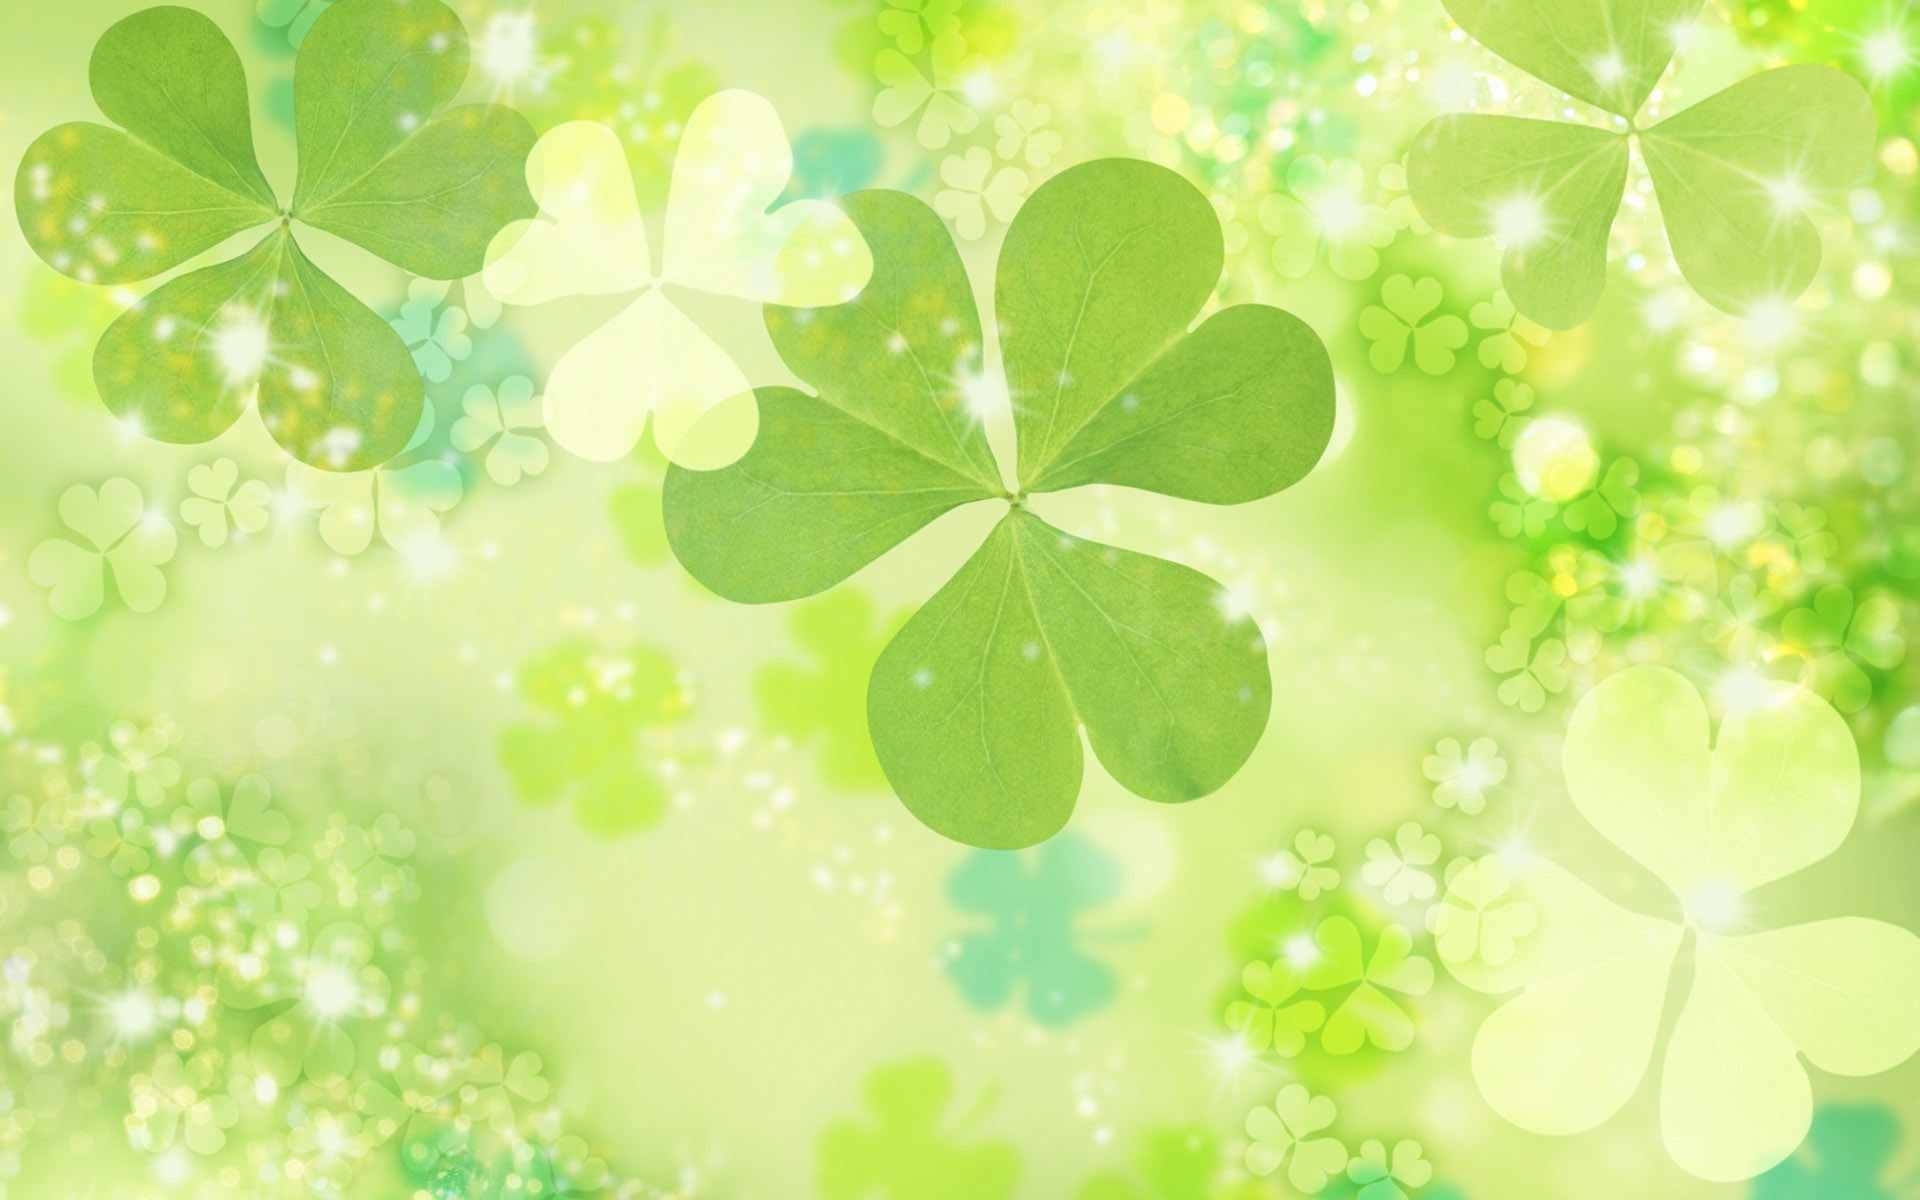 10 New St Patrick Day Backgrounds Desktop FULL HD 1080p For PC Background